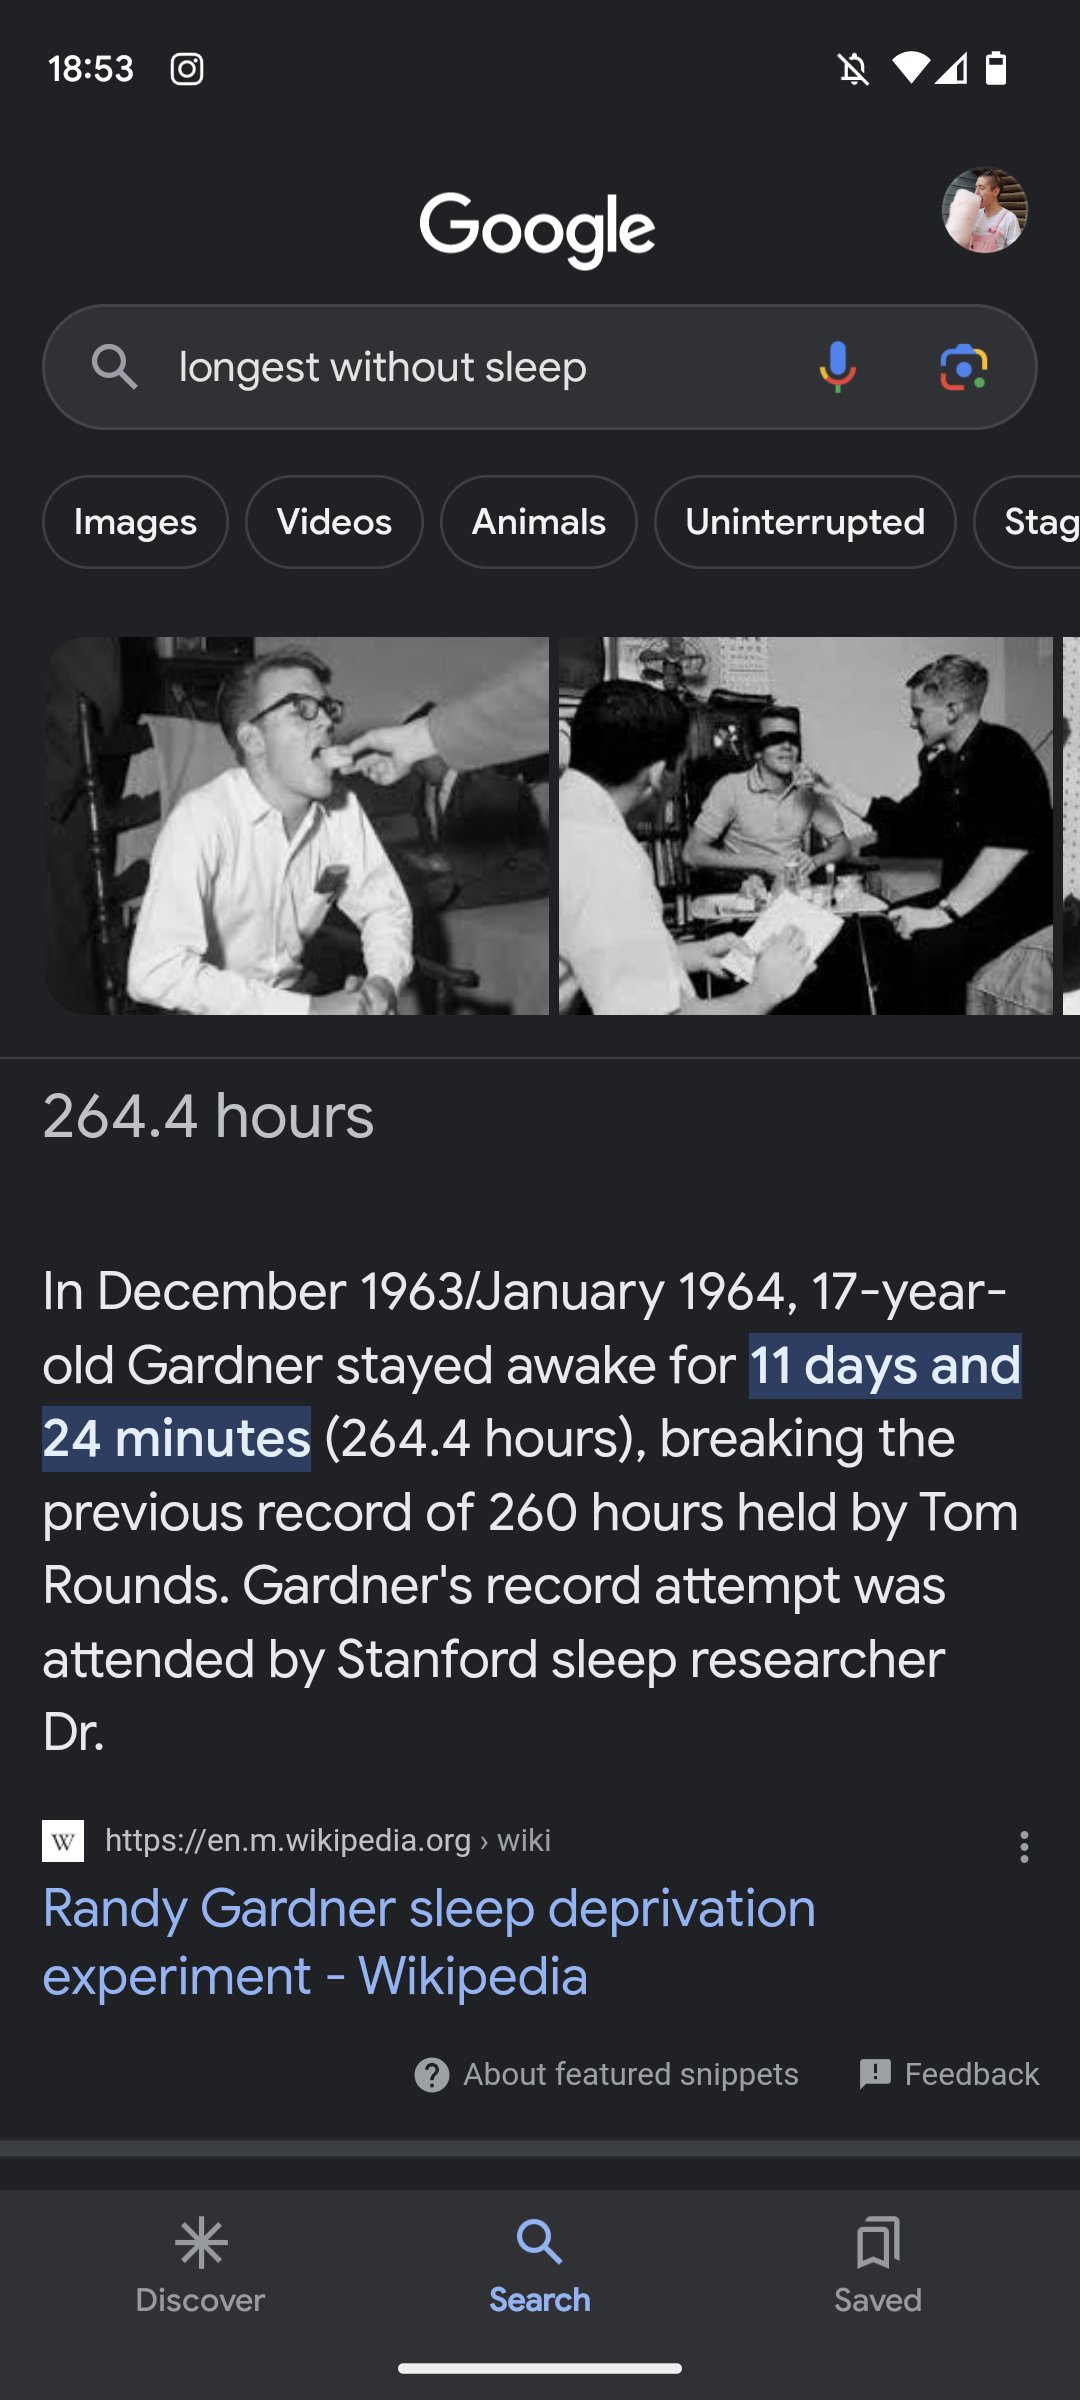 Screenshot of the Google search results top snippet for 'longest without sleep' taken on a Pixel phone, stating 264.4 hours with some black and white photos and a description of the 1960s experiment